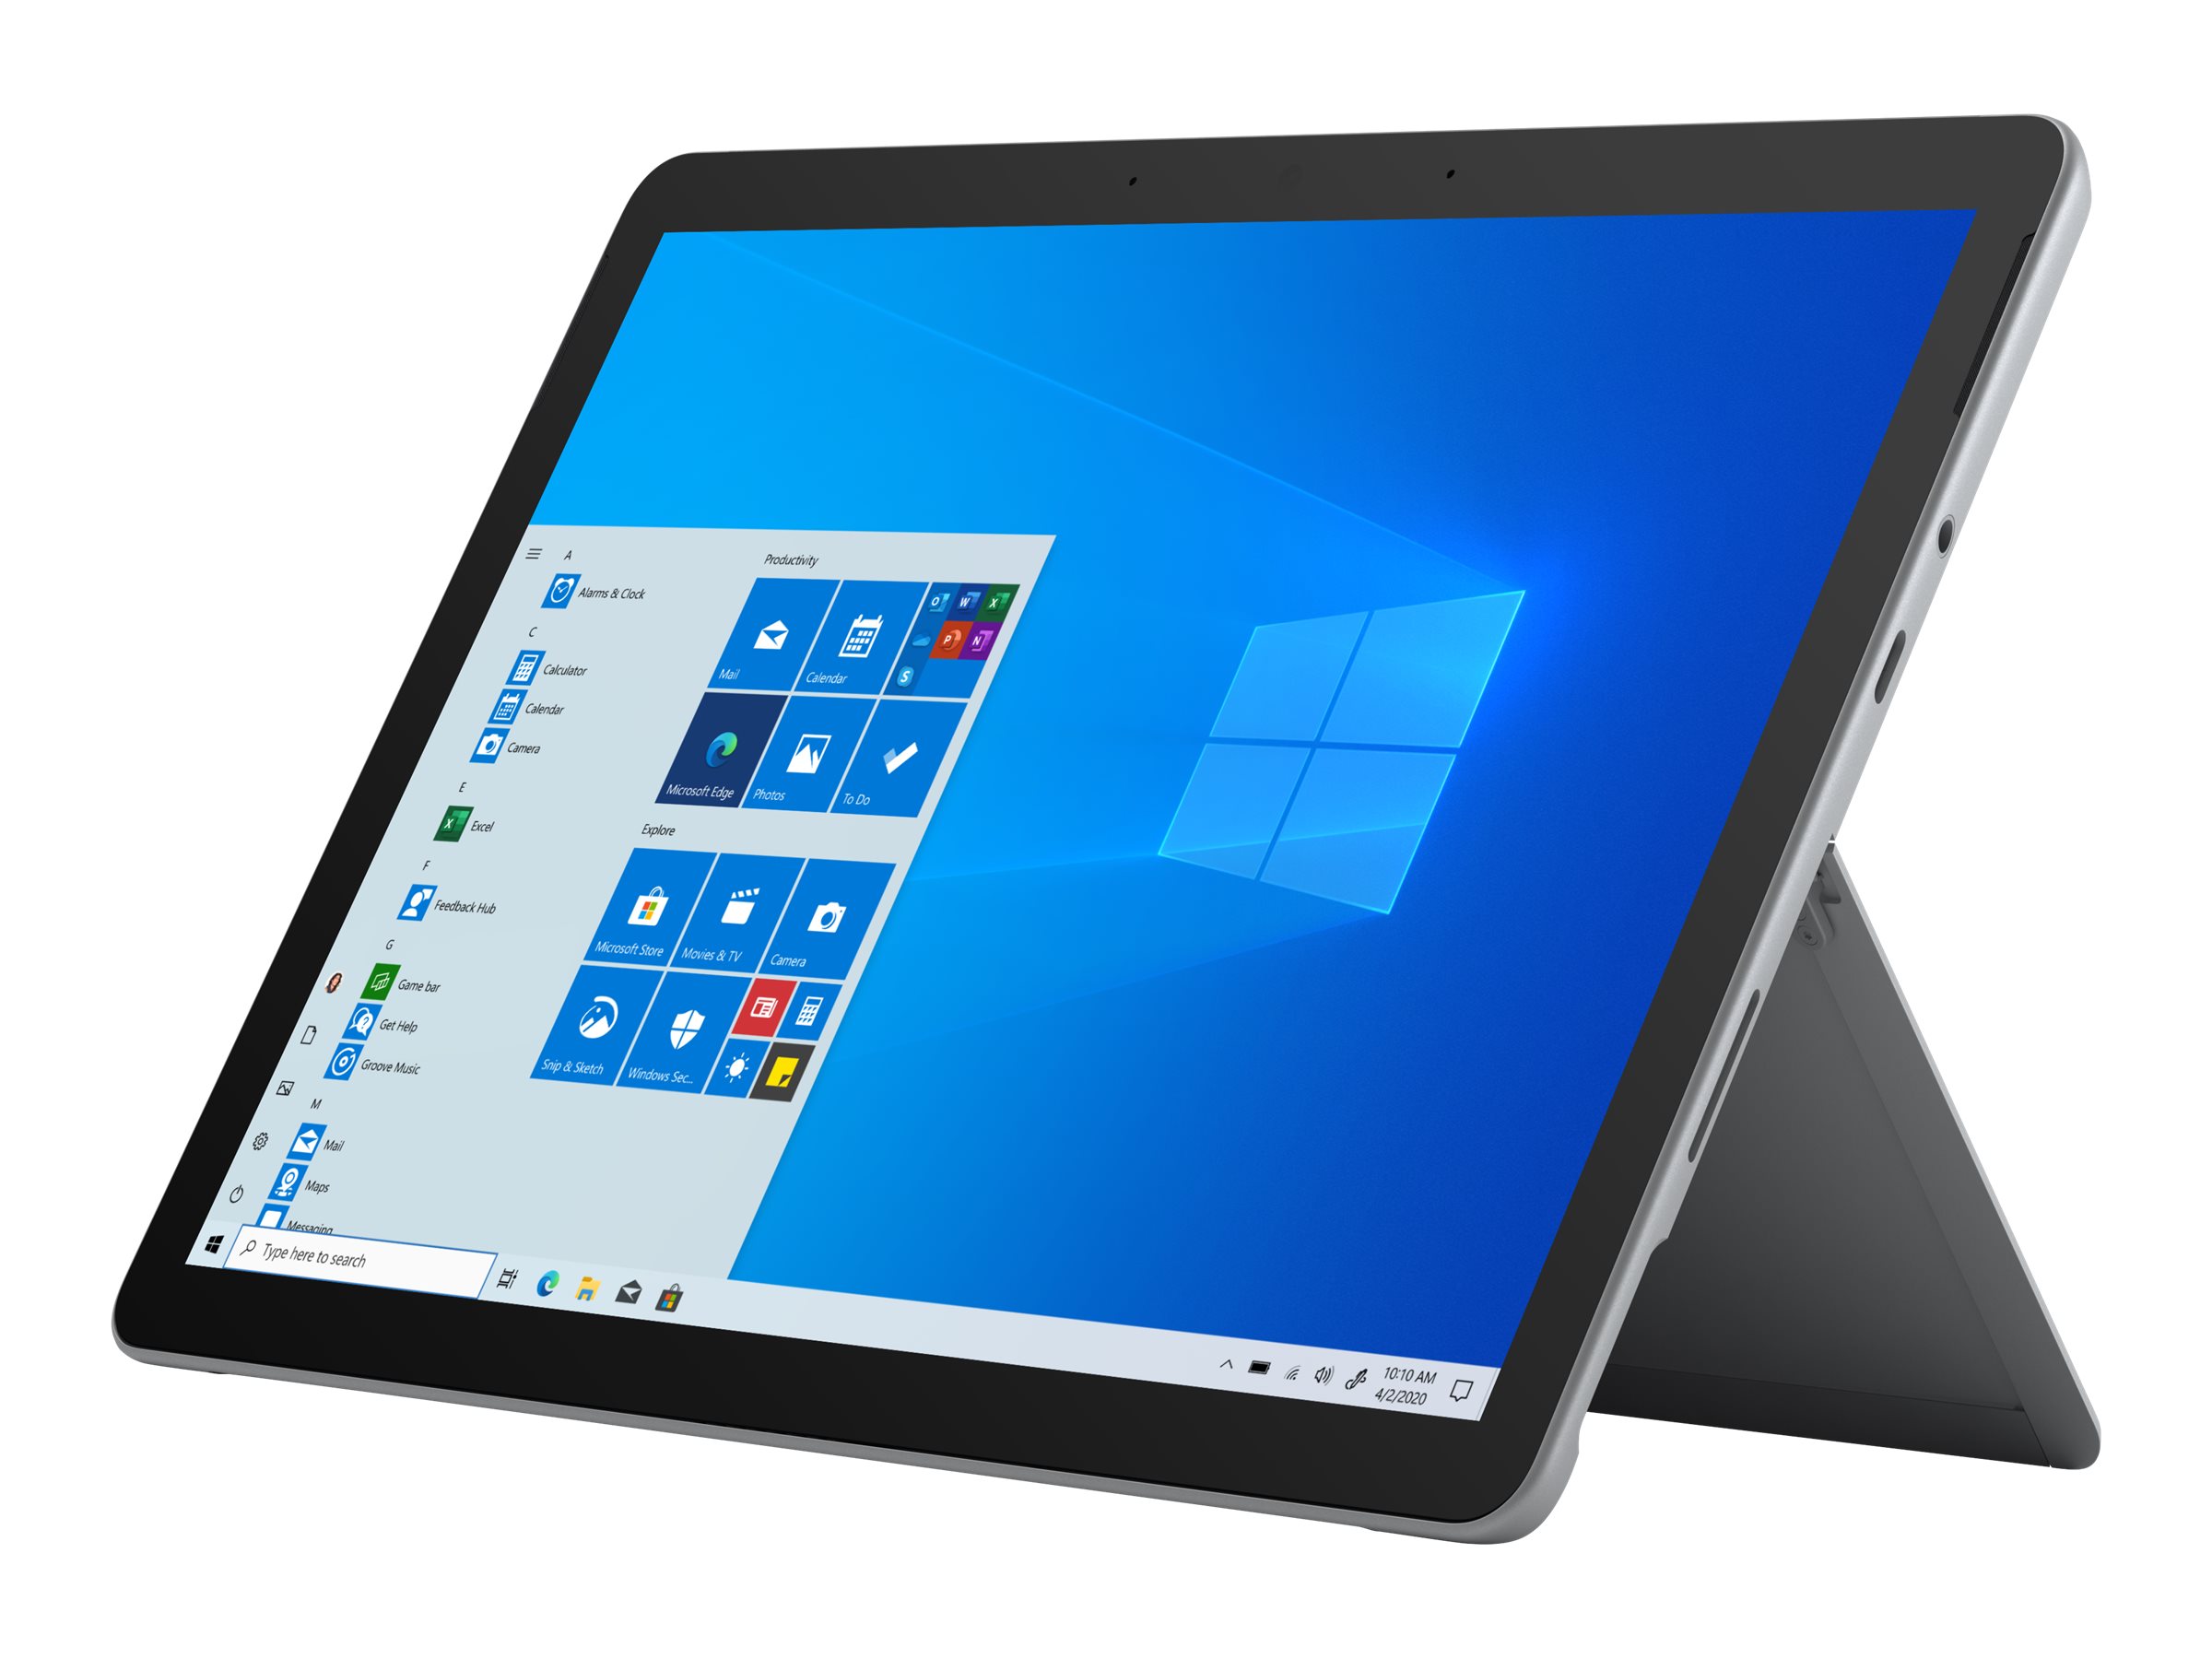 Preview: Microsoft Surface Go 3 - Tablet - Intel Pentium Gold 6500Y / 1.1 GHz - Win 10 Pro - UHD Graphics 615 - 4 GB RAM - 64 GB 